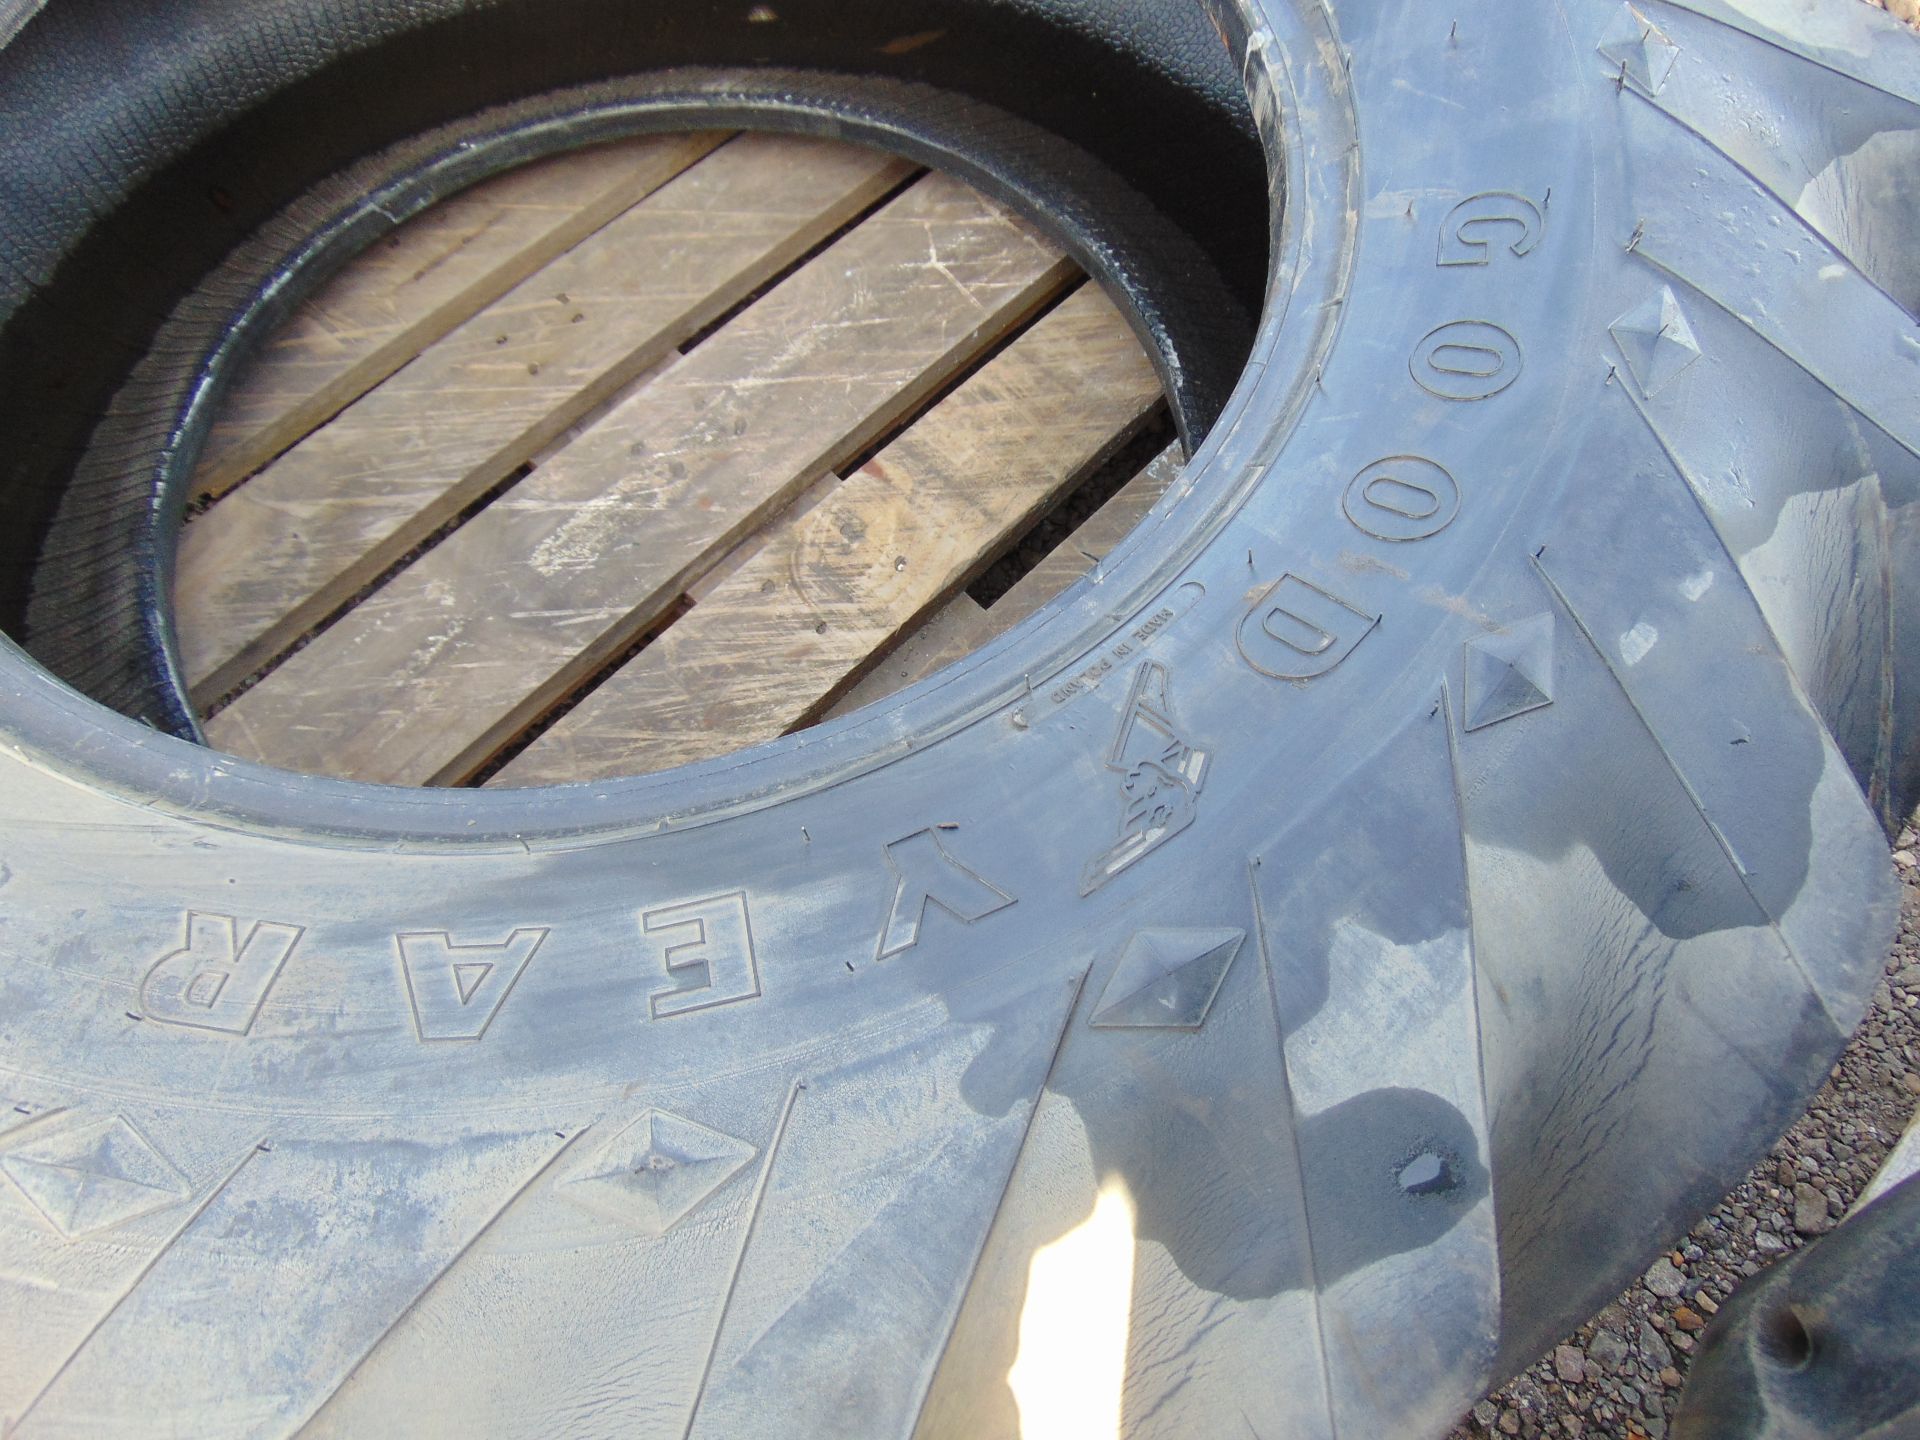 Goodyear Sure Grip 15.5/80-24 Tyre - Image 2 of 6